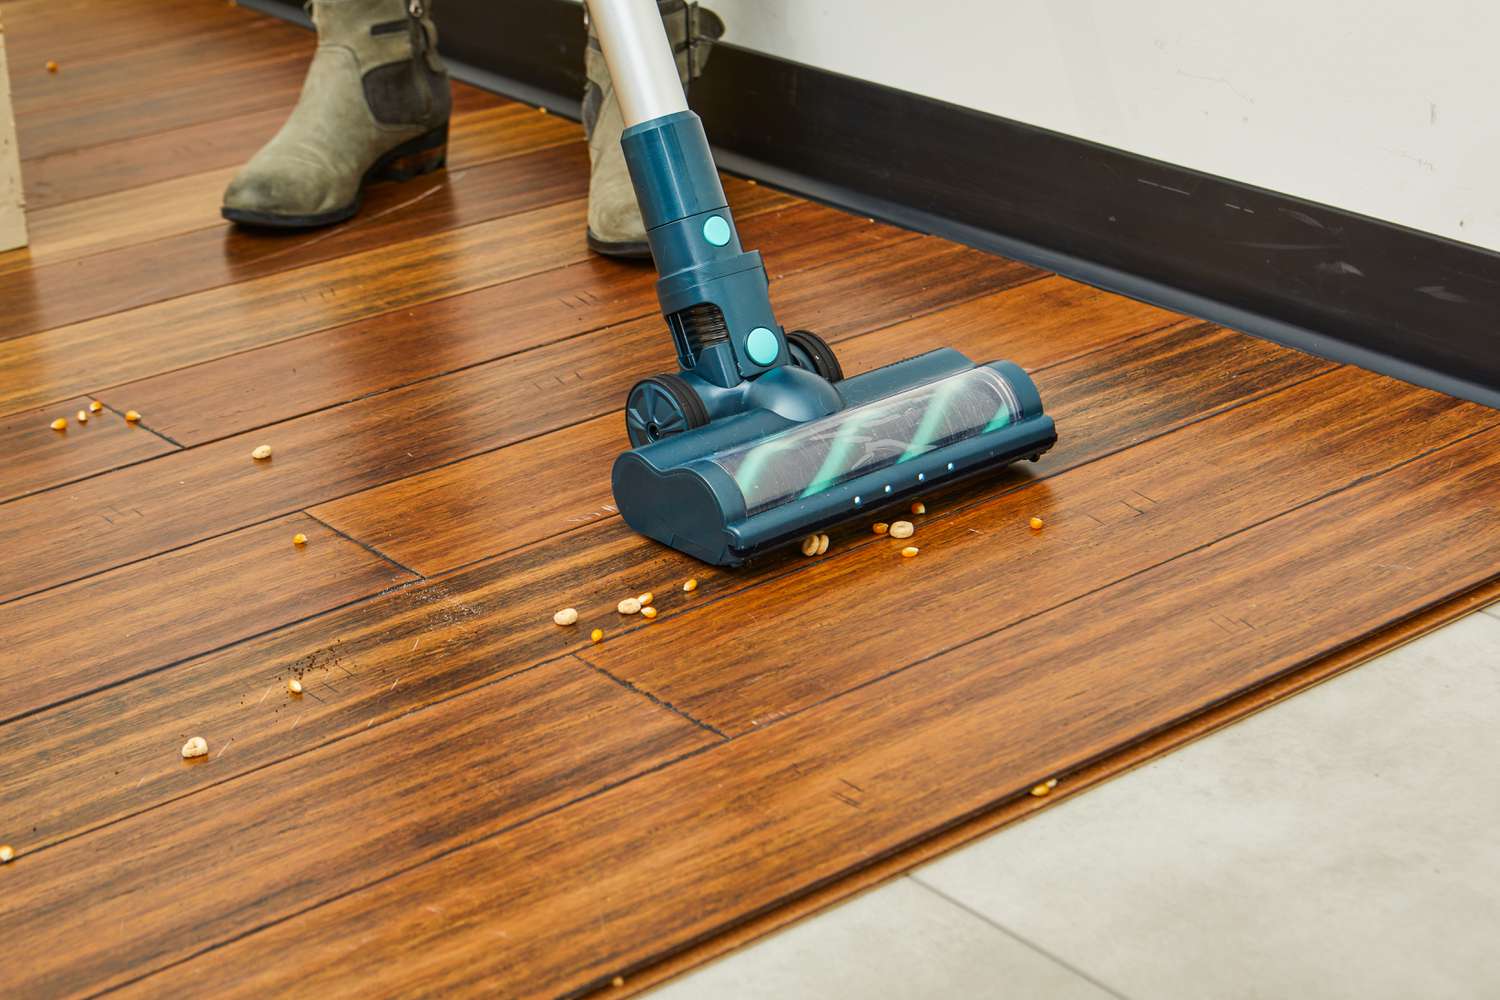 The Belife V12 Cordless Vacuum Cleaner being used to vacuum cereal off a wood floor.